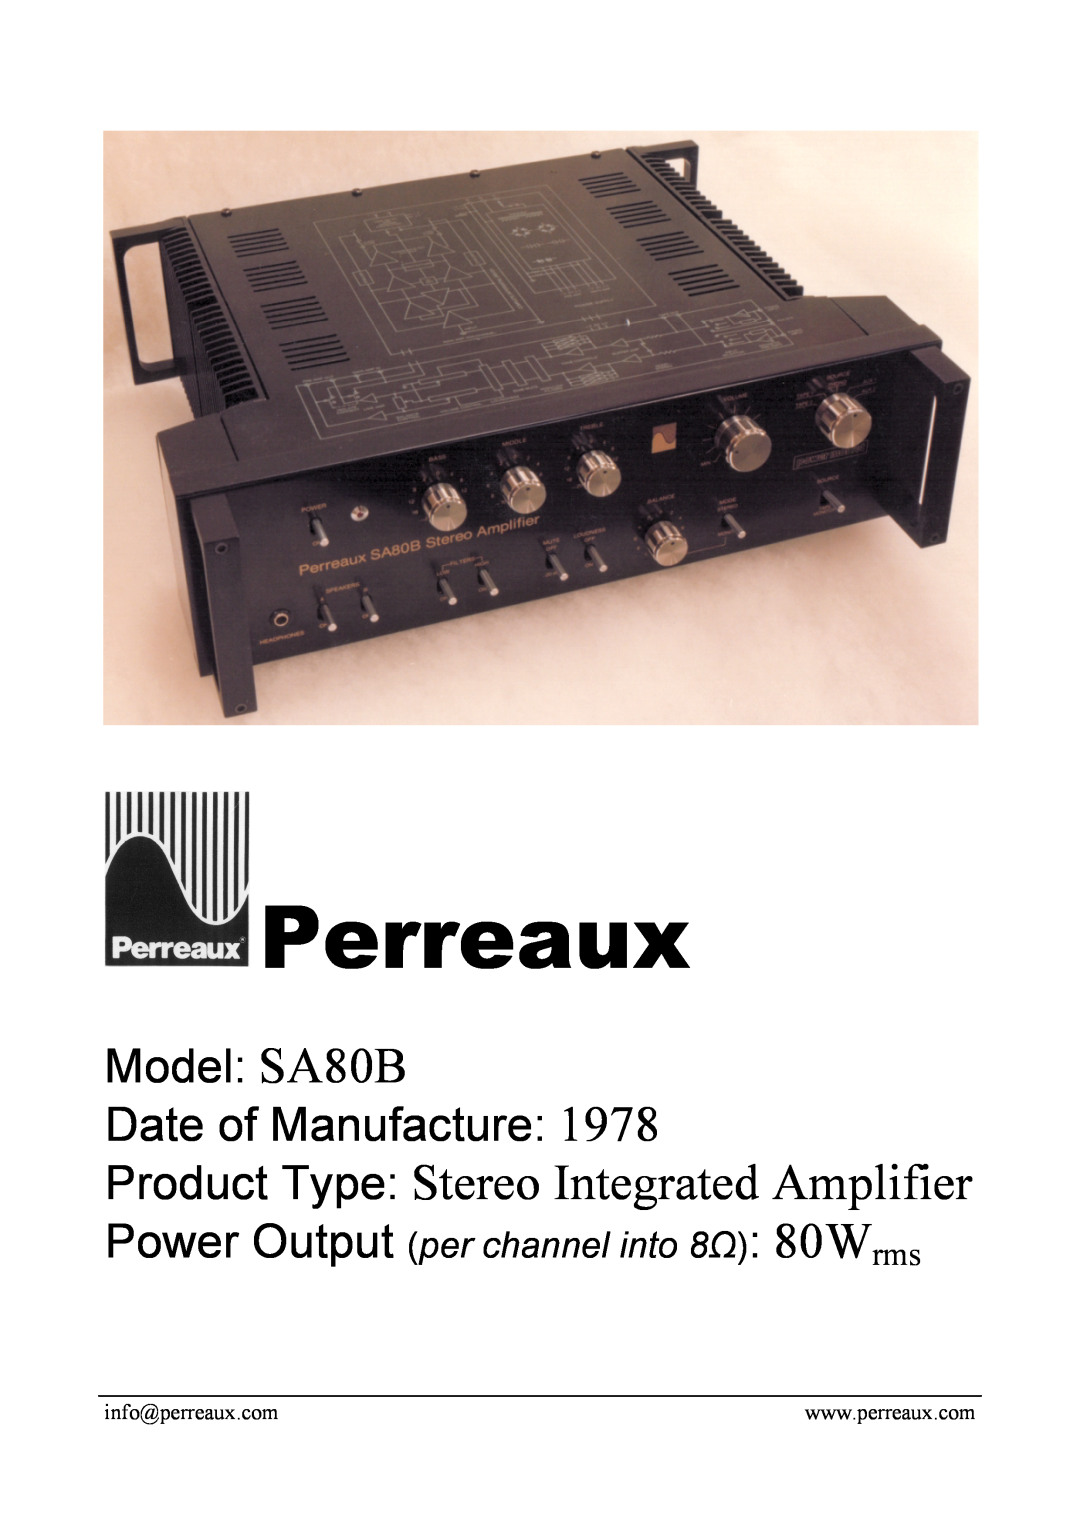 Perreaux manual Perreaux, Product Type Stereo Integrated Amplifier, Model SA80B Date of Manufacture 